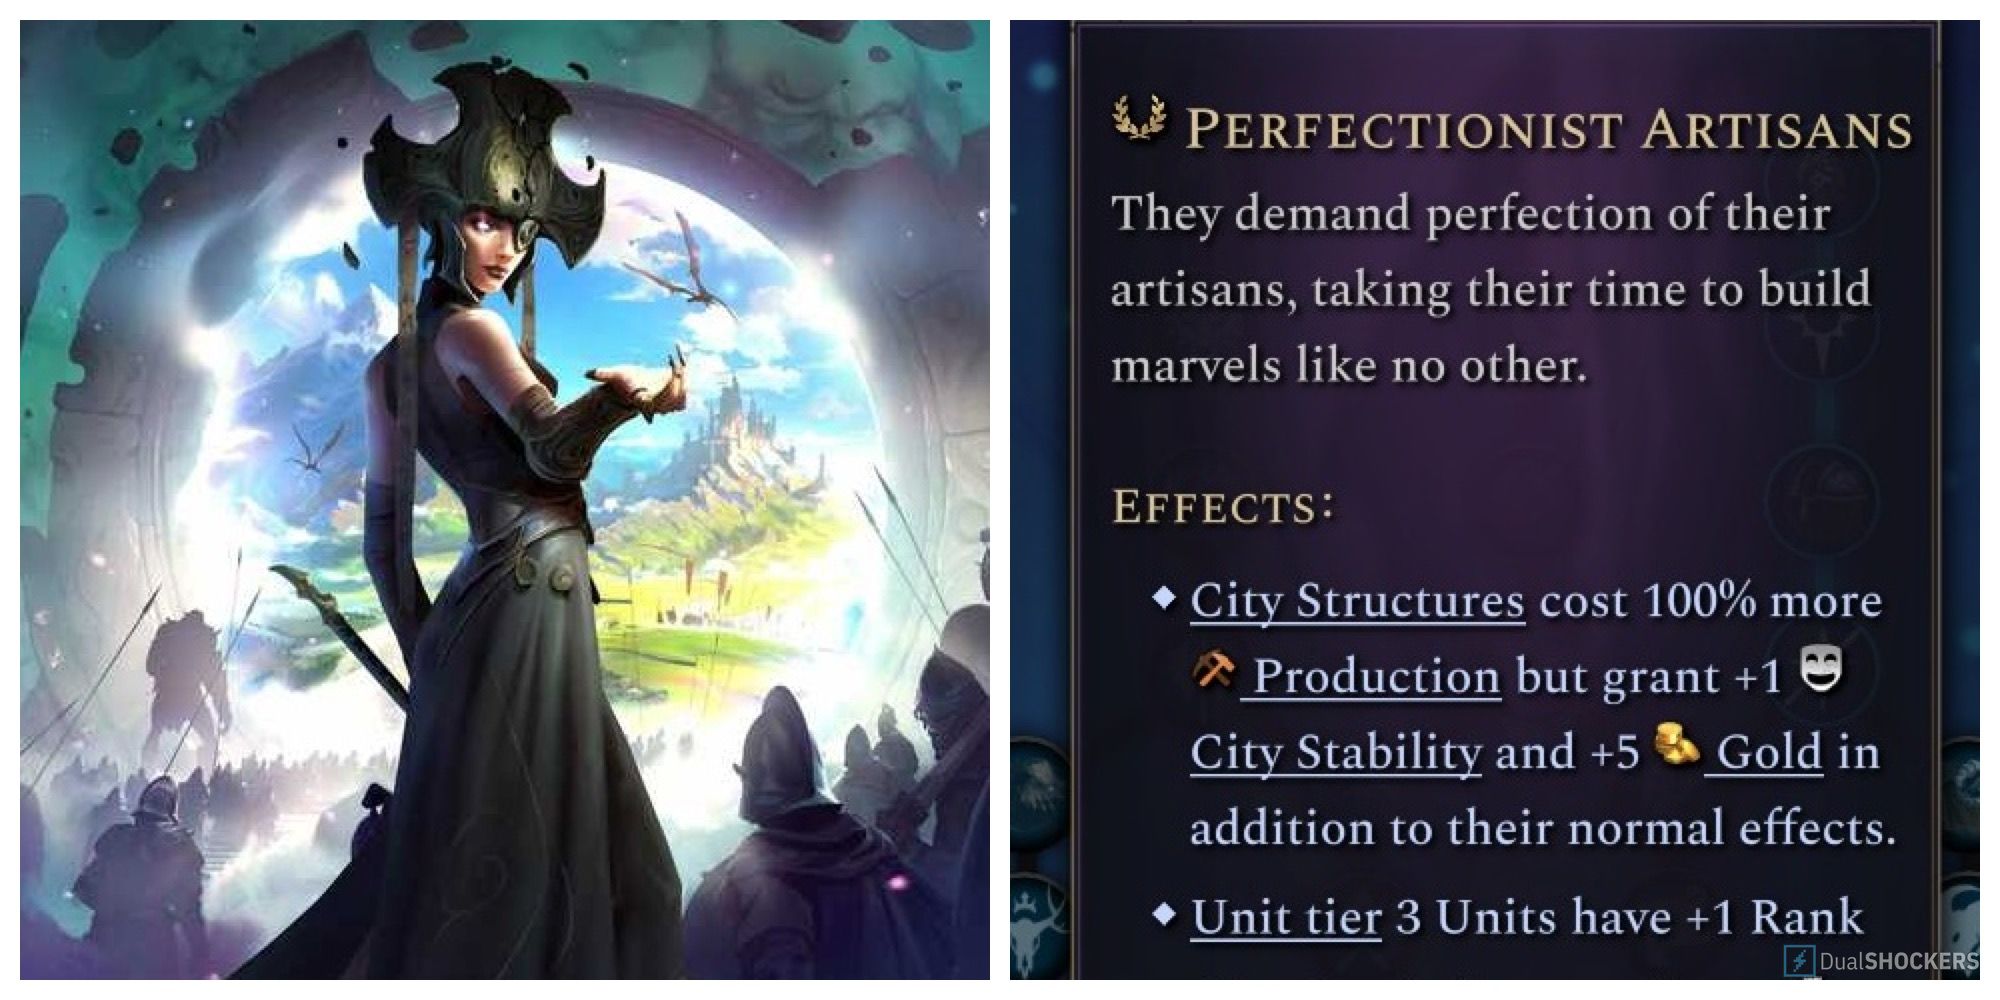 Classic Wizard King portrait for Age of Wonders 4 next to snippet of Perfectionist Artisans